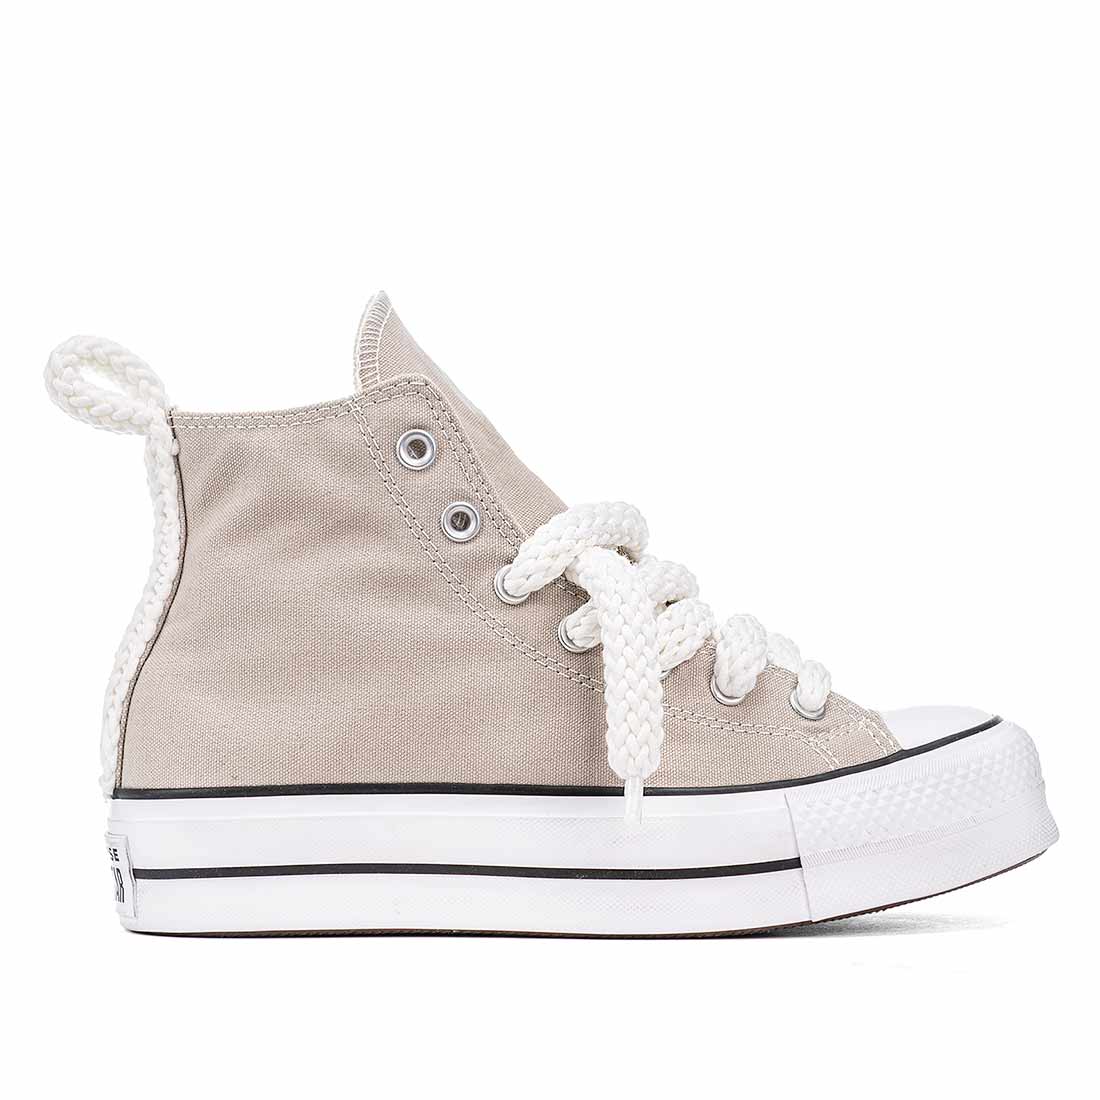 Converse all star beige con stringhe rope 